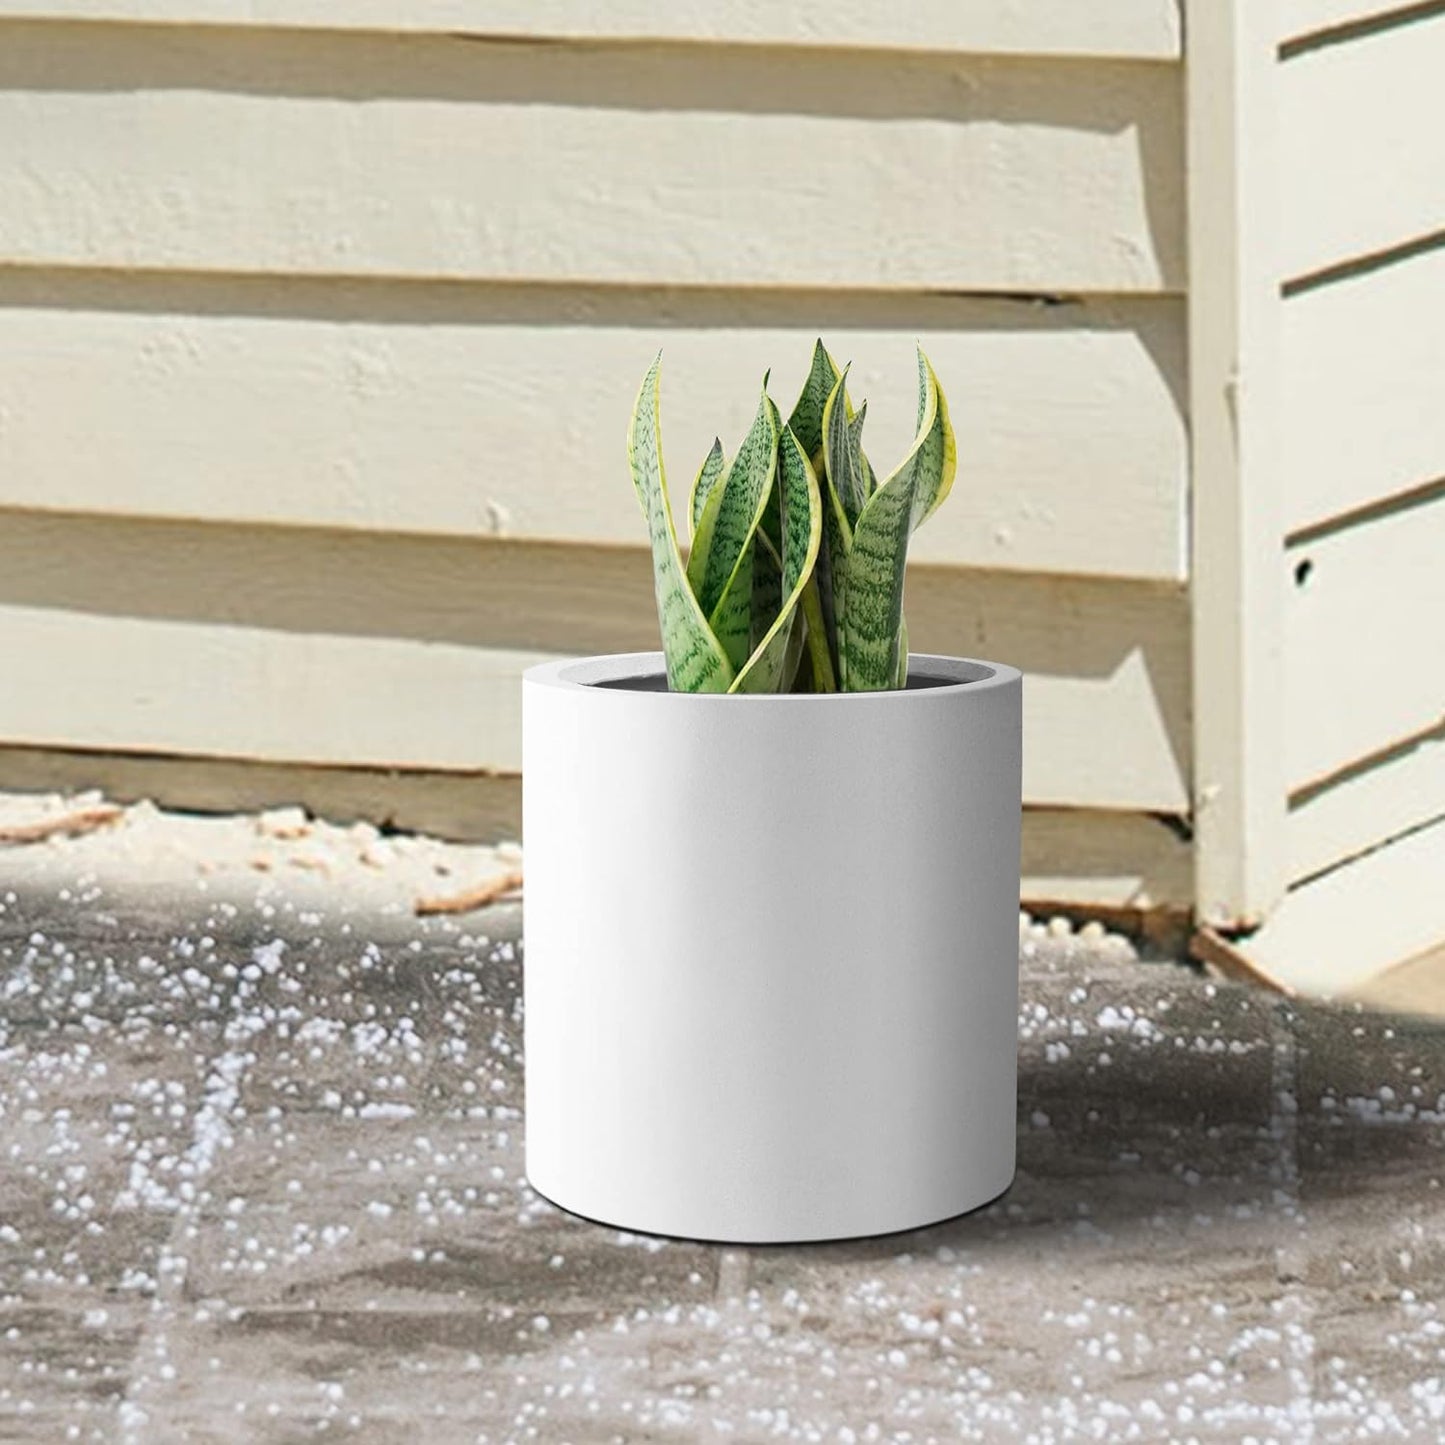 Kante 9.8",12.6",15.7" Dia Round Concrete Planter Set of 3, Modern Style Large Cylindrical Plant Pot with Drainage Hole and Rubber Plug for Indoor Outdoor Patio, Weathered Concrete